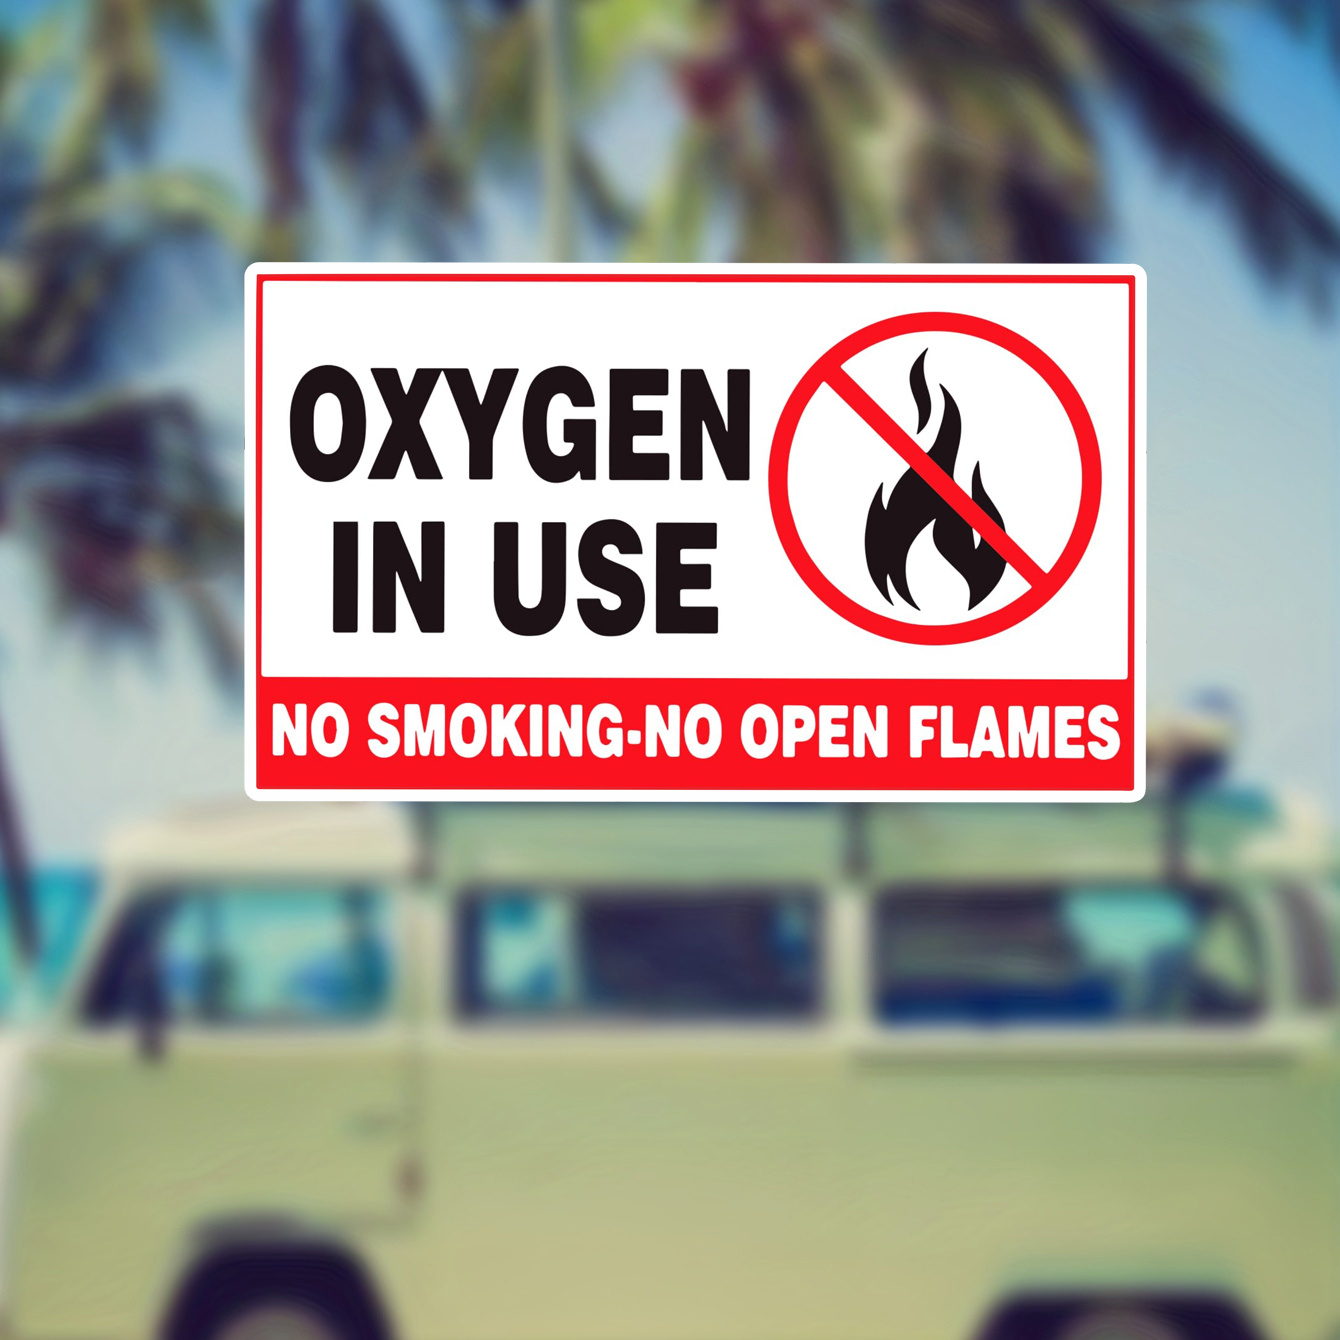 

Oxygen In Use Sign Self Adhesive Vinyl Window Bumper Sticker Decal For Car Truck Van Suv Window Wall Boat Cup Tumblers Laptop Or Any Smooth Surface